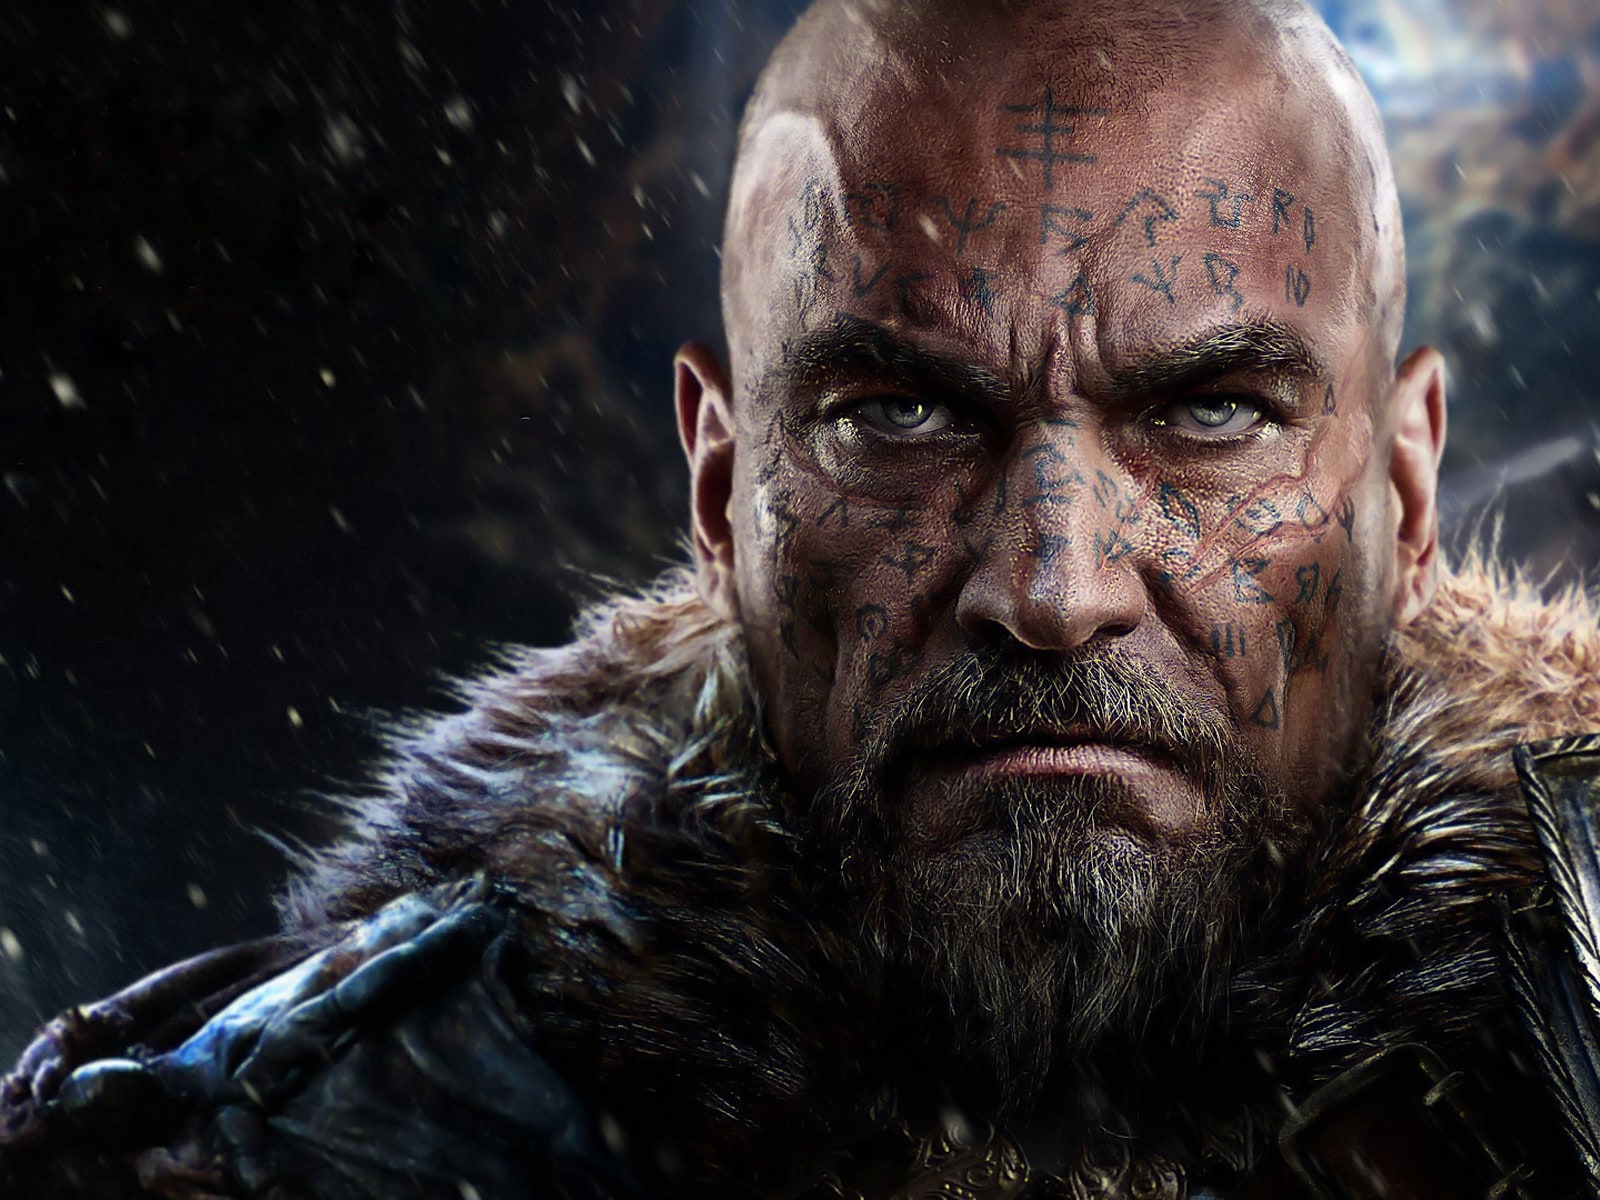 cheats for lords of the fallen ps4